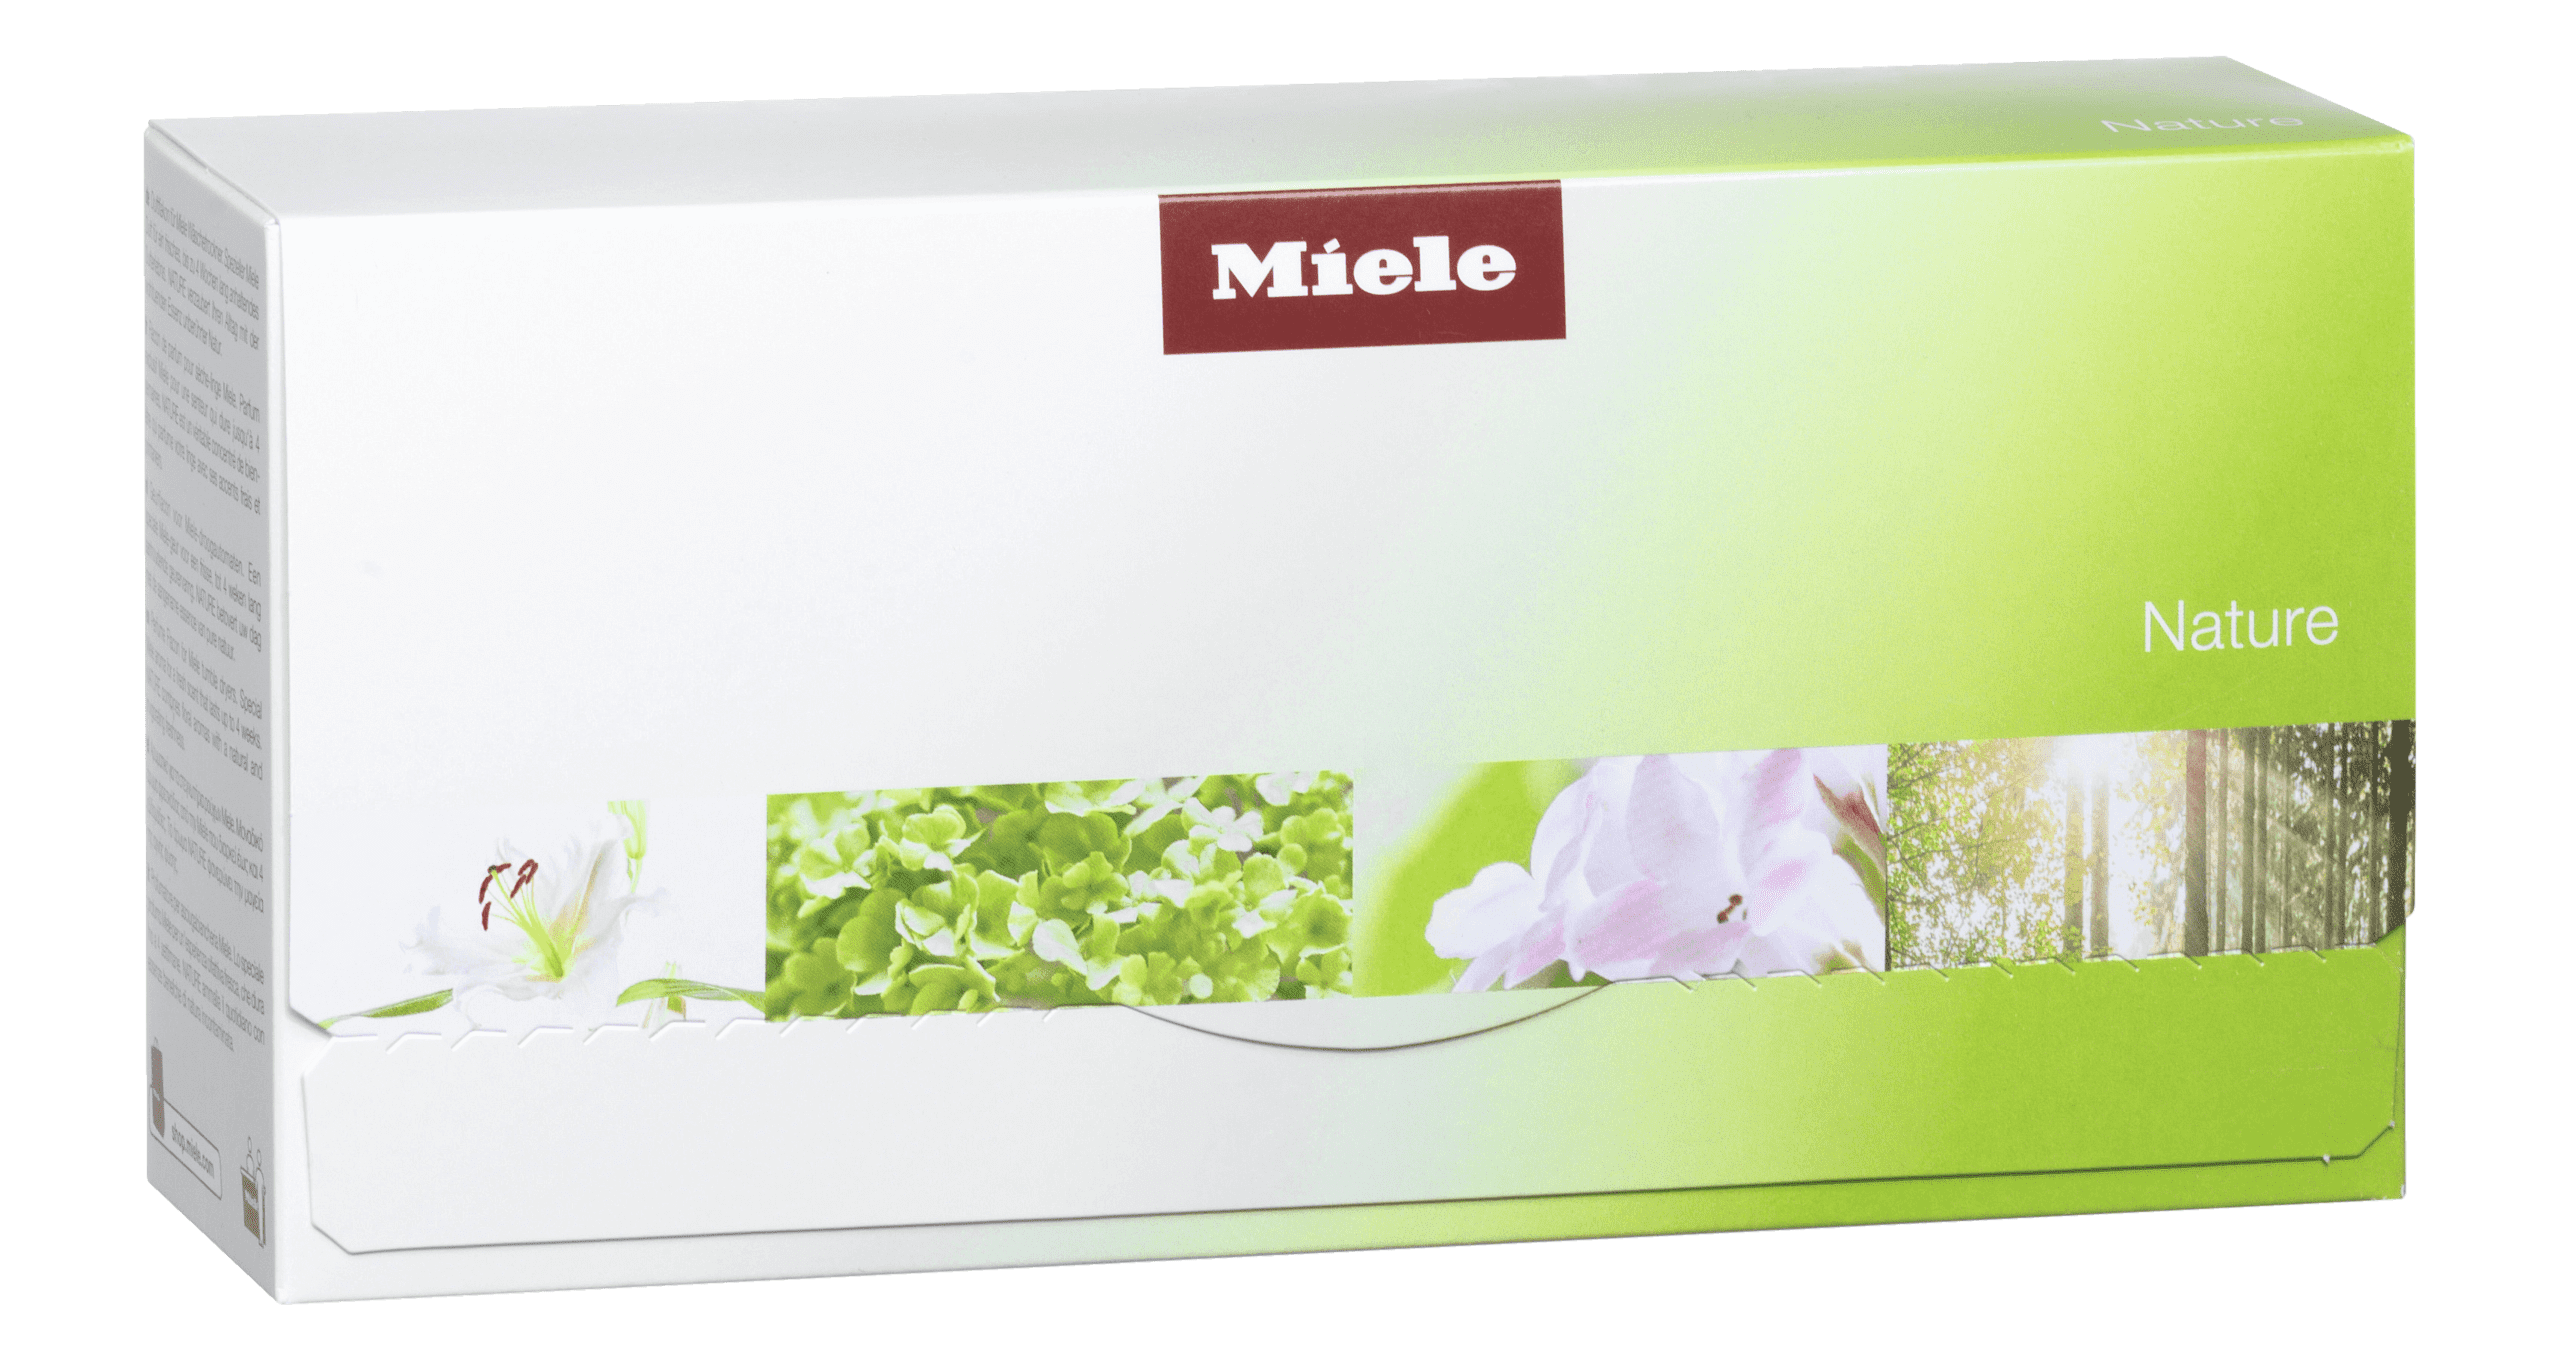 Miele FAN451L Fa N 451 L - Set Of 3X Miele Nature For 150 Drying Cycles - The Aromatic Floral Scent Of Early Morning.